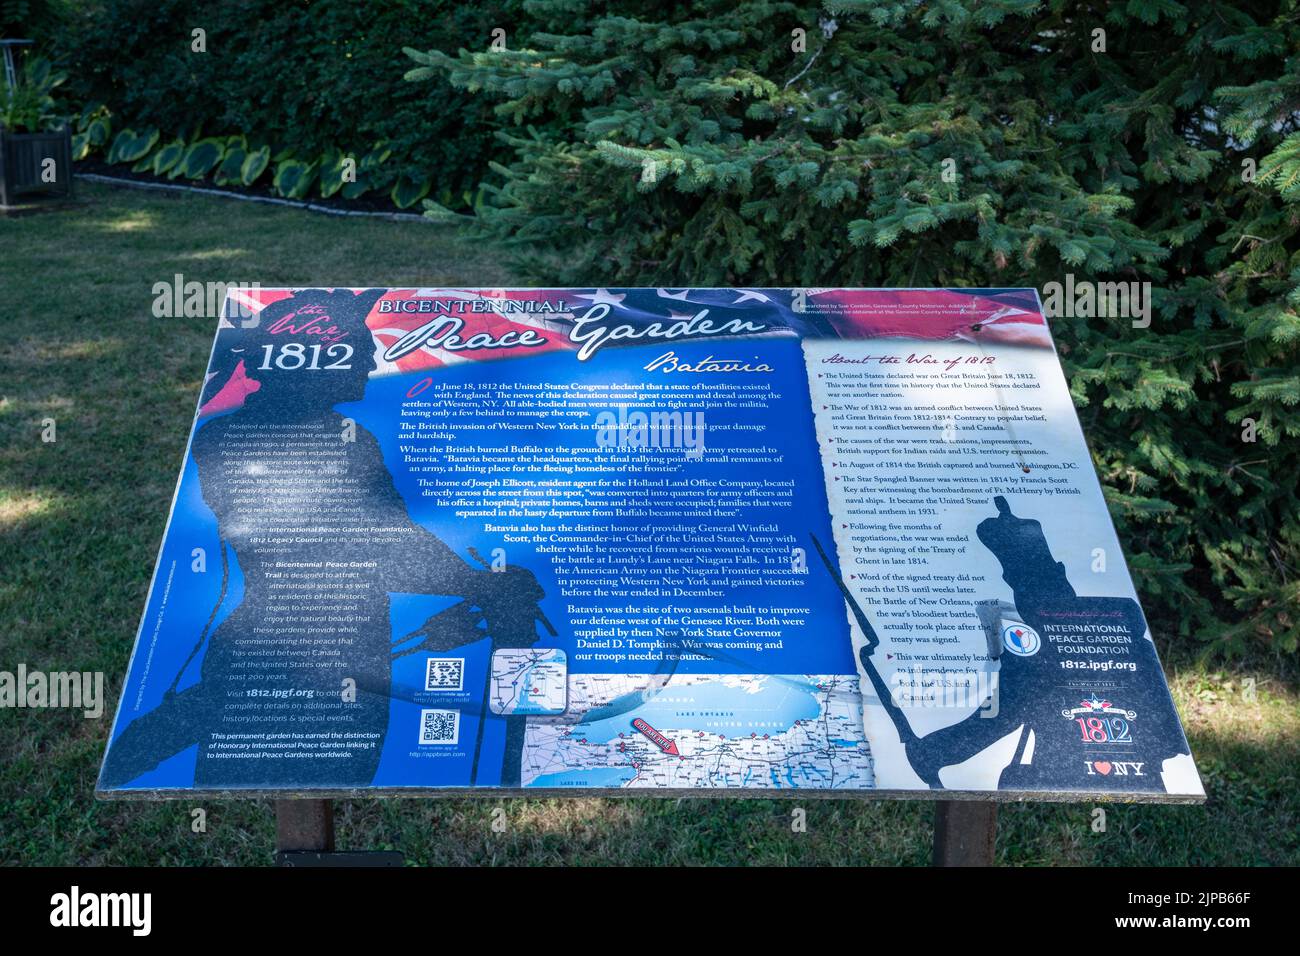 Batavia, NY - July 29, 2022: Sign at the Bicentennial Peace Garden gives the history of the War of 1812. Stock Photo